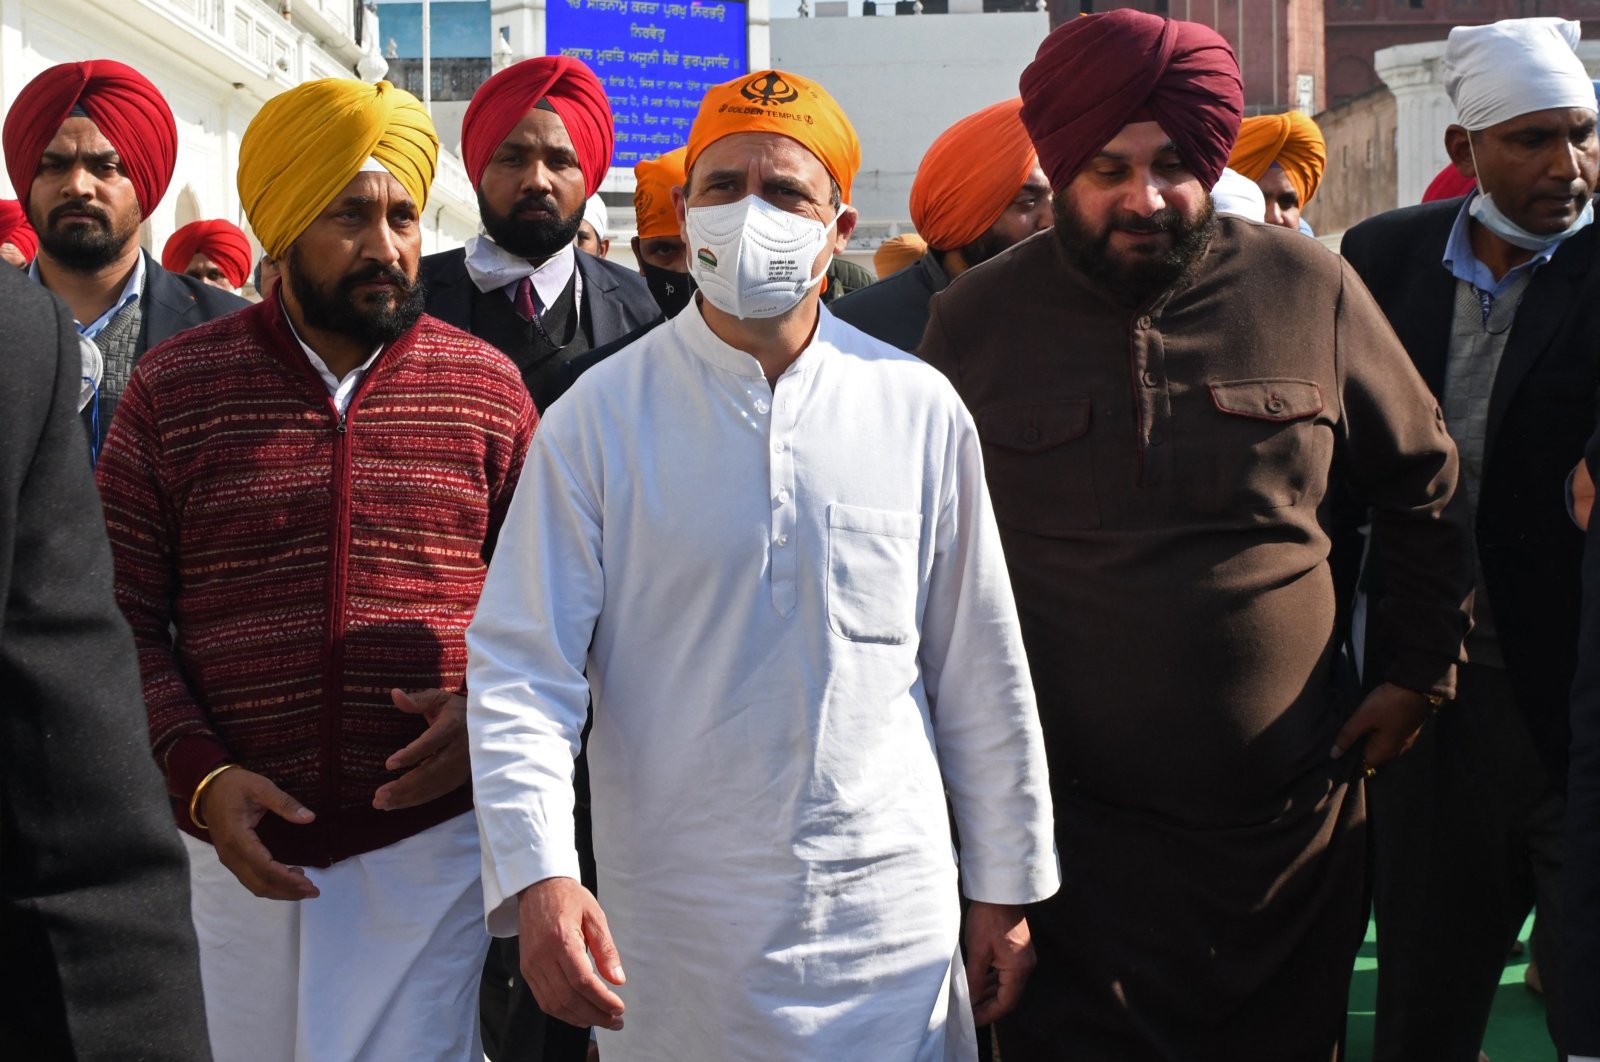 India&#039;s opposition Congress party leaders Rahul Gandhi (C), Navjot Singh Sidhu (2R) and Punjab&#039;s state chief minister Charanjit Singh Channi (2L) walk during their visit at the Golden Temple ahead of state assembly elections in Amritsar, India, Jan. 27, 2022. (AFP Photo)